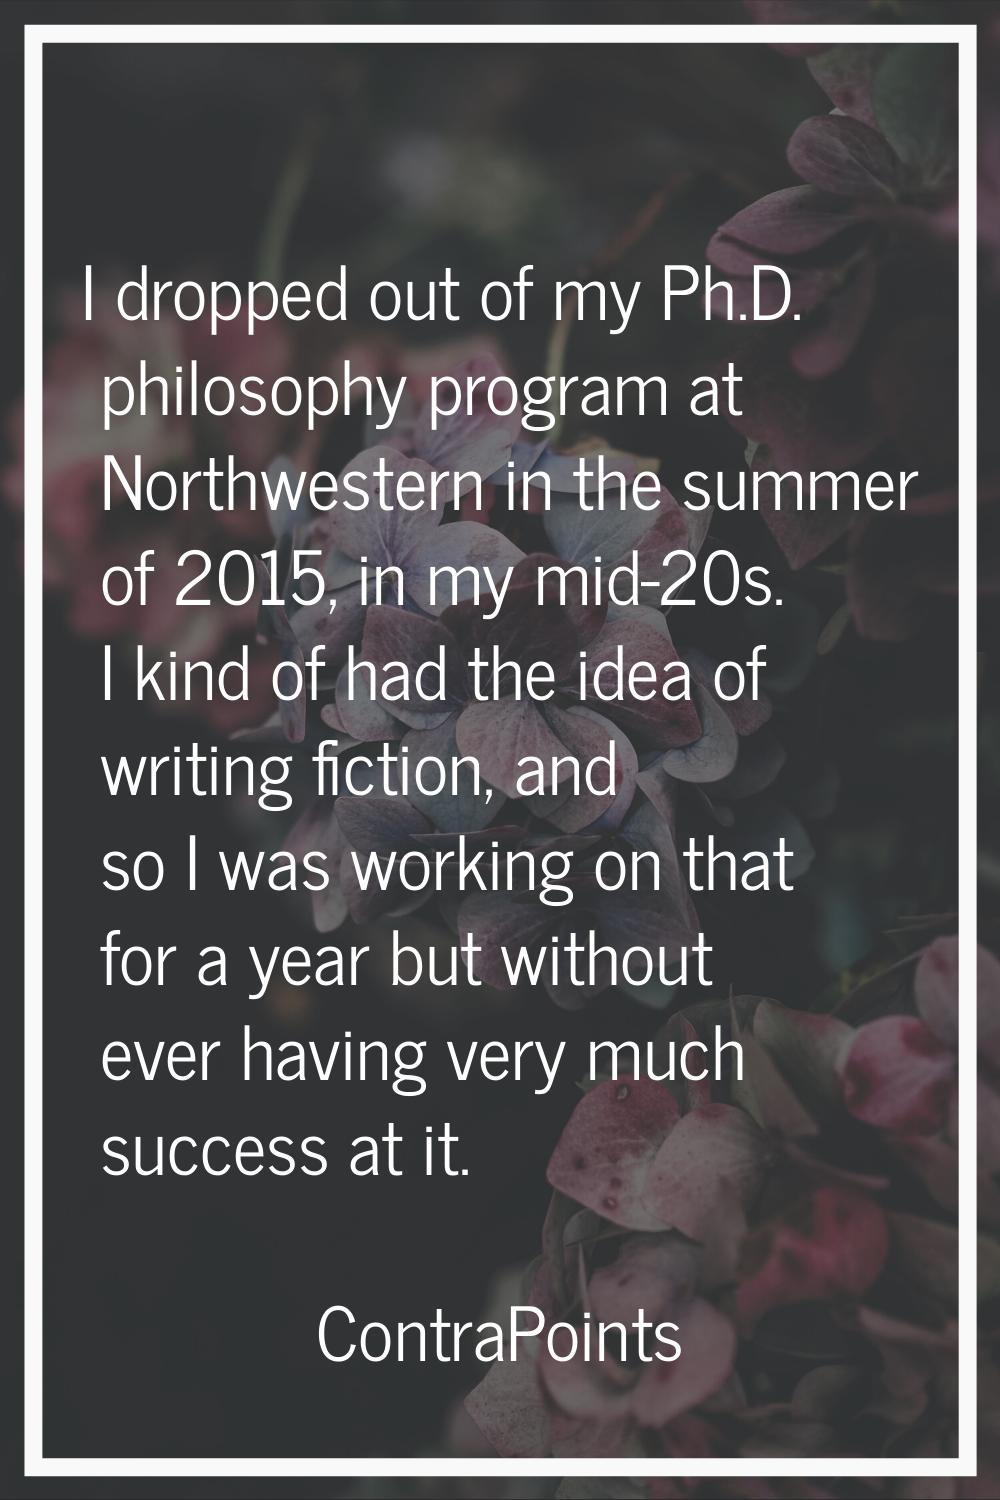 I dropped out of my Ph.D. philosophy program at Northwestern in the summer of 2015, in my mid-20s. 